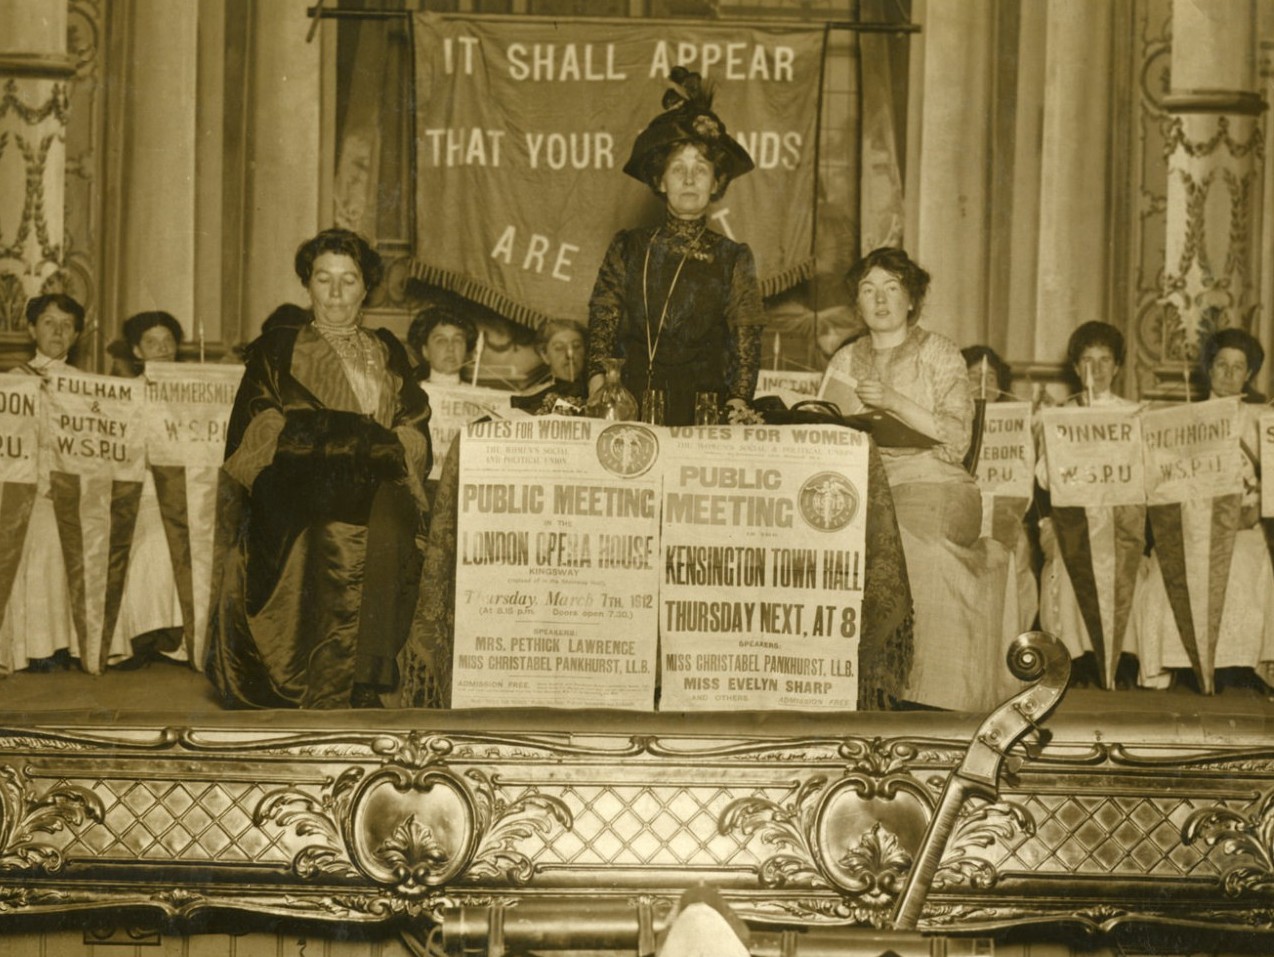 Emmeline Pankhurst speaking at a Women's Social & Political Union. Source: LSE Library, Flickr - No known copyright restrictions